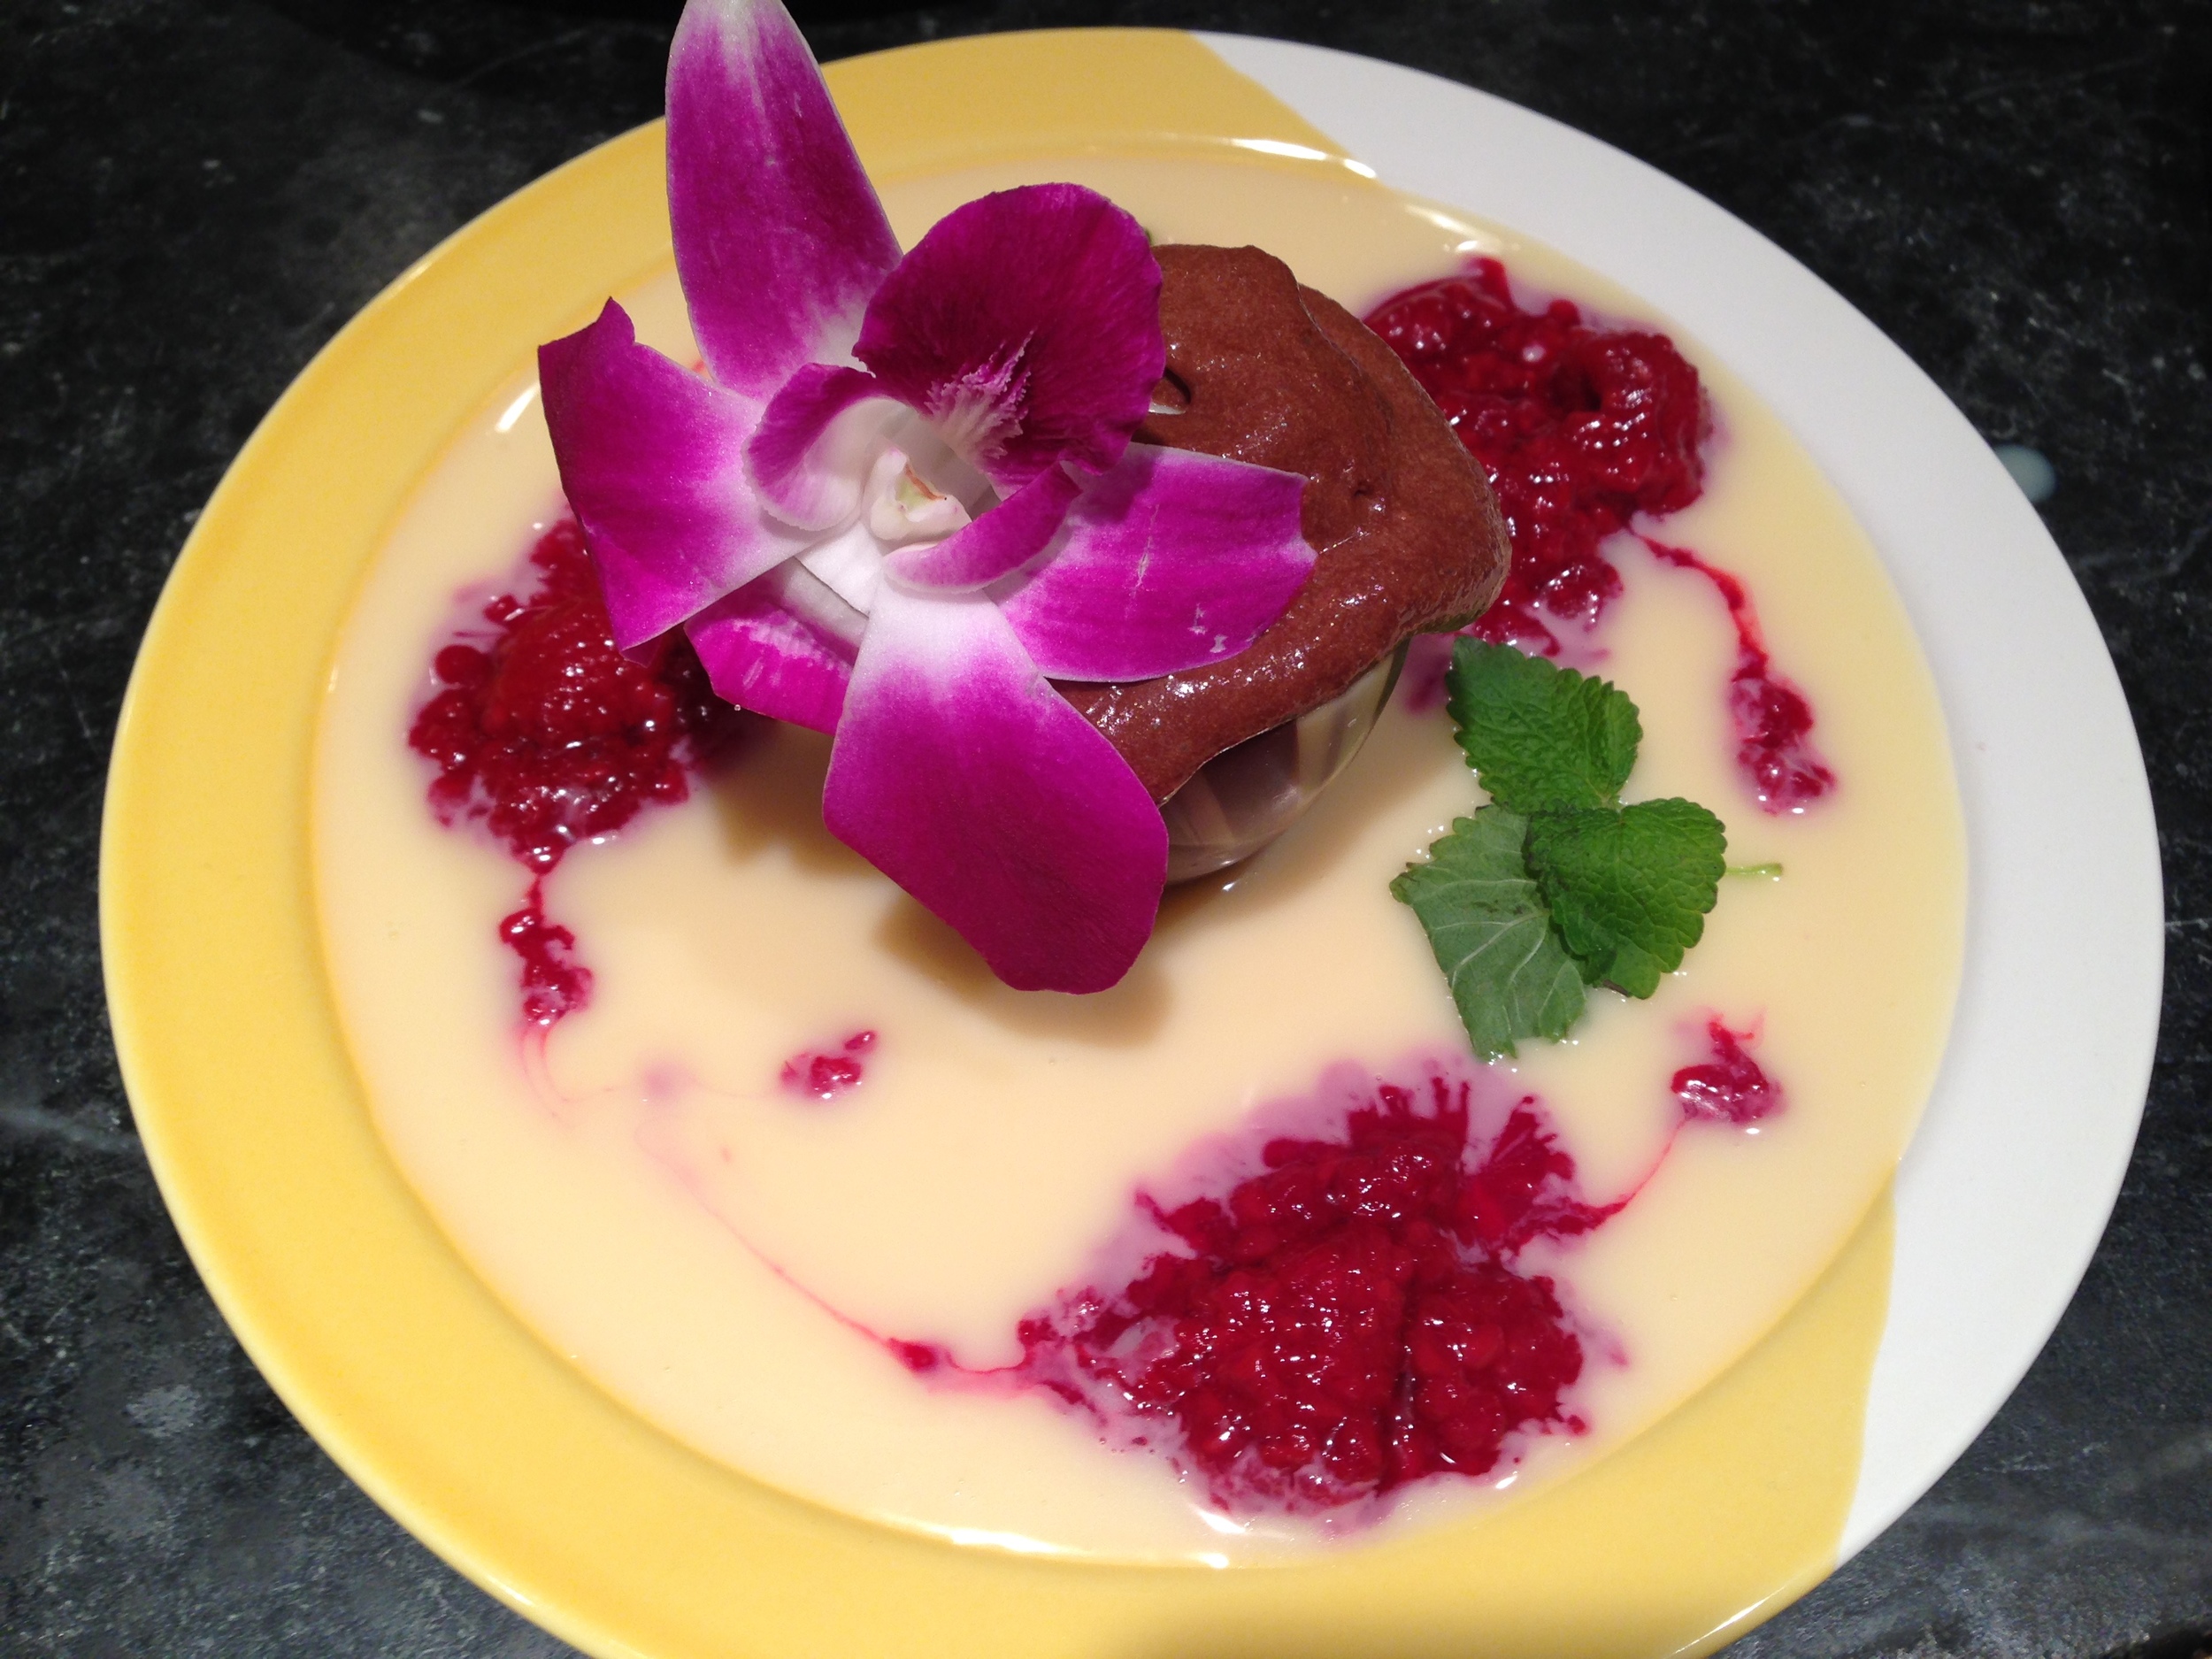 Chocolate mousse in marbled chocolate cup, white chocolate creme anglais, raspberry coulis, lemon verbena